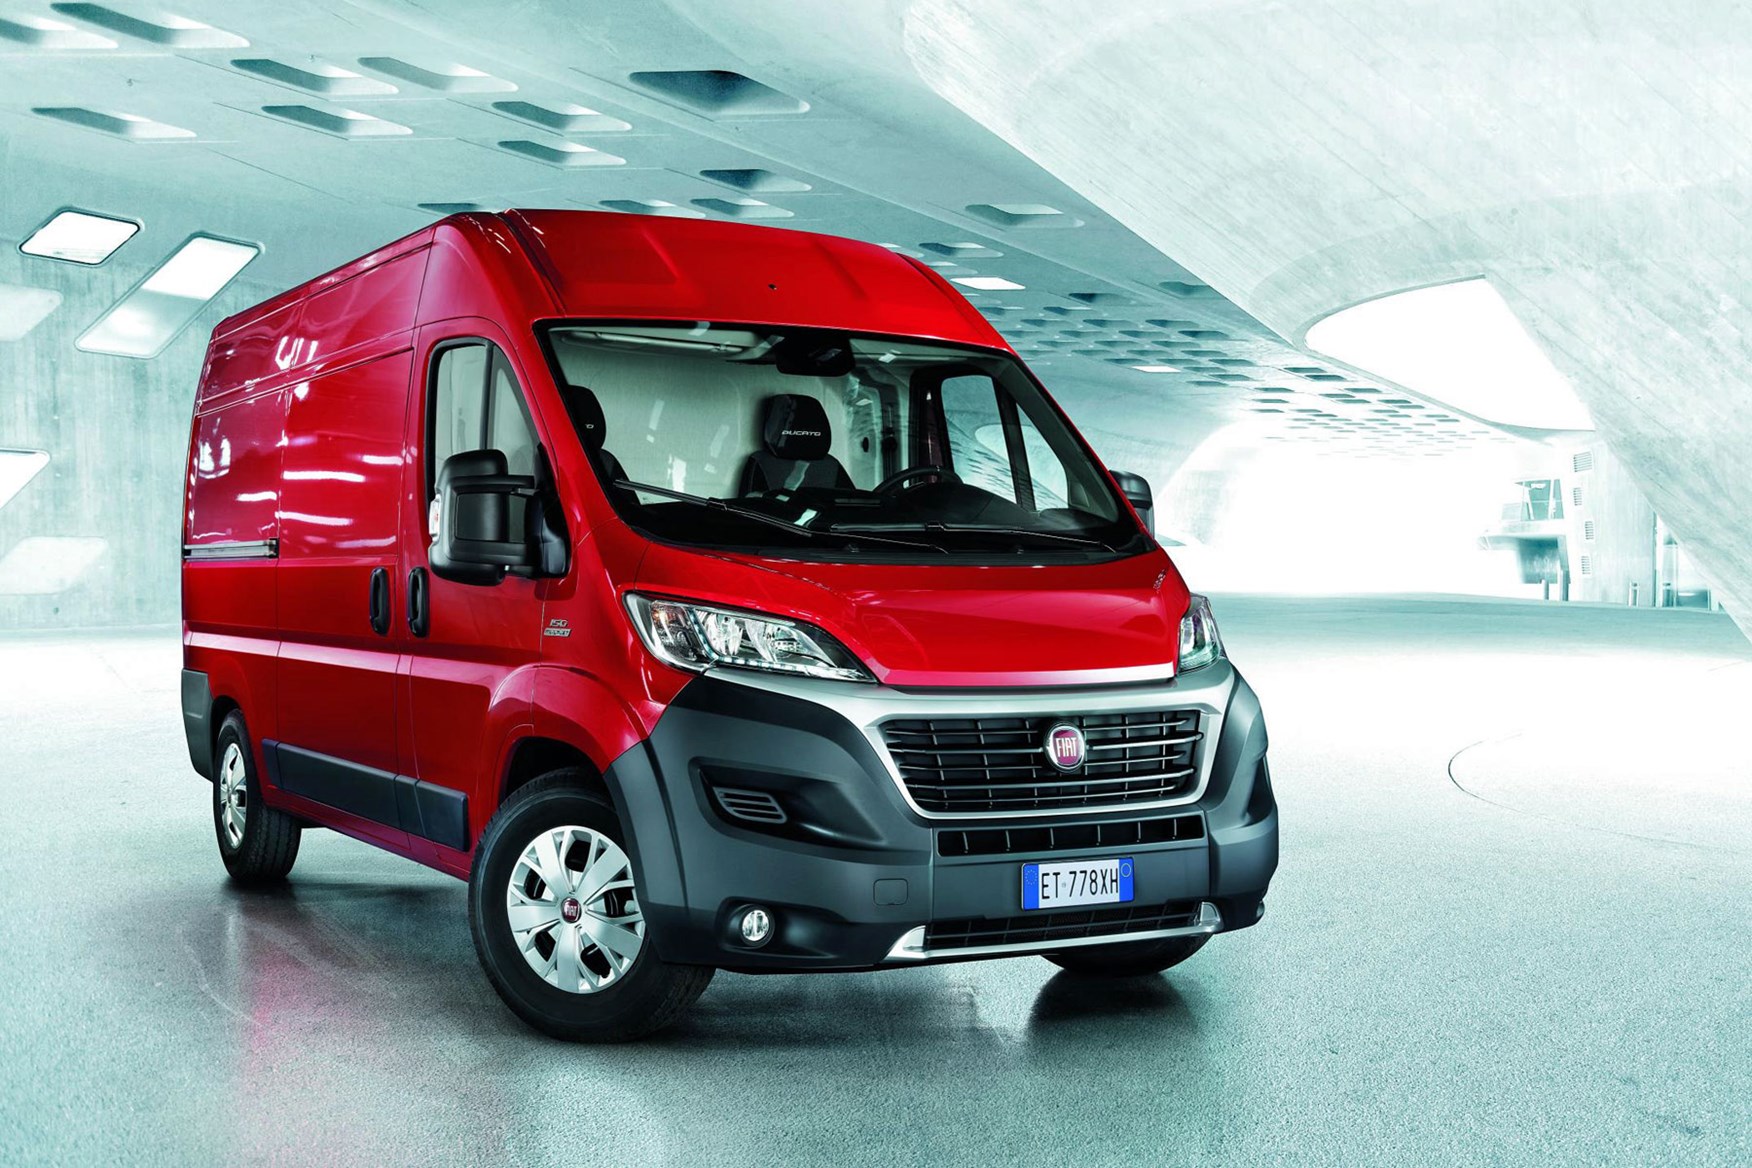 Fiat Ducato review - 2016 Euro 6 engines, front view, red